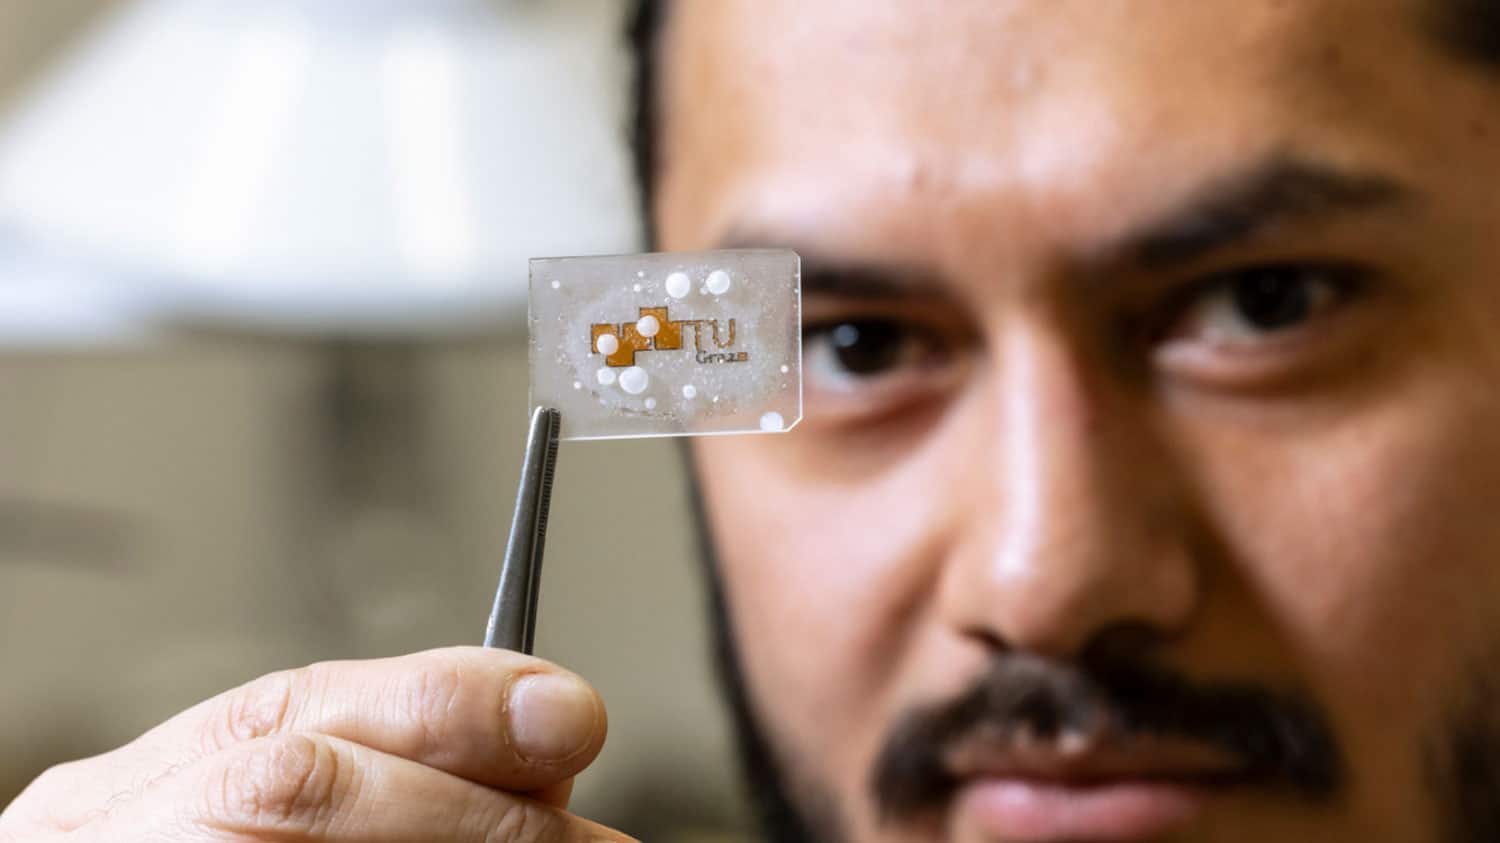 The ice-repellent coating is wafer-thin. For their experiments, Anna Maria Coclite and Gabriel Hernández Rodríguez (pictured here) applied it in thicknesses between 300 and 500 nanometres.